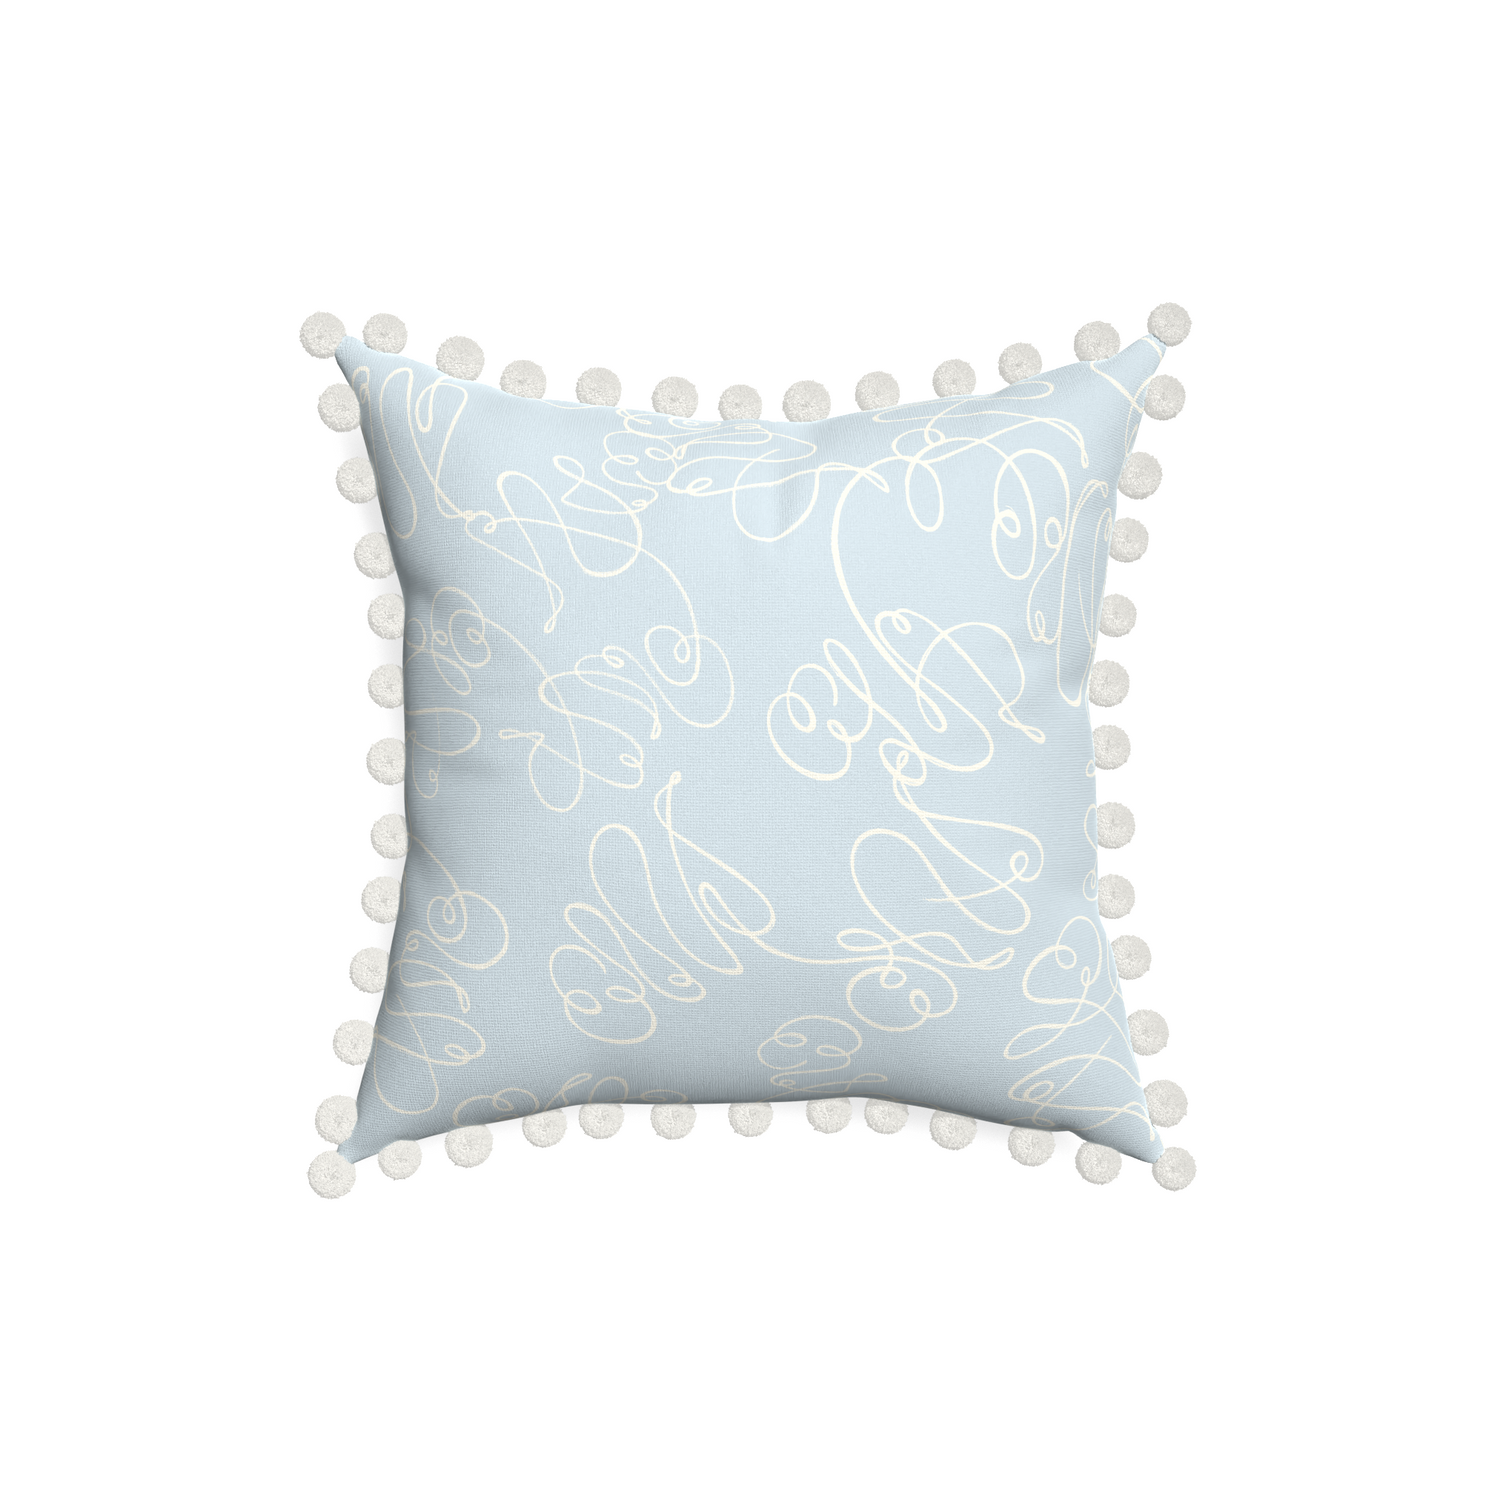 18-square mirabella custom powder blue abstractpillow with snow pom pom on white background